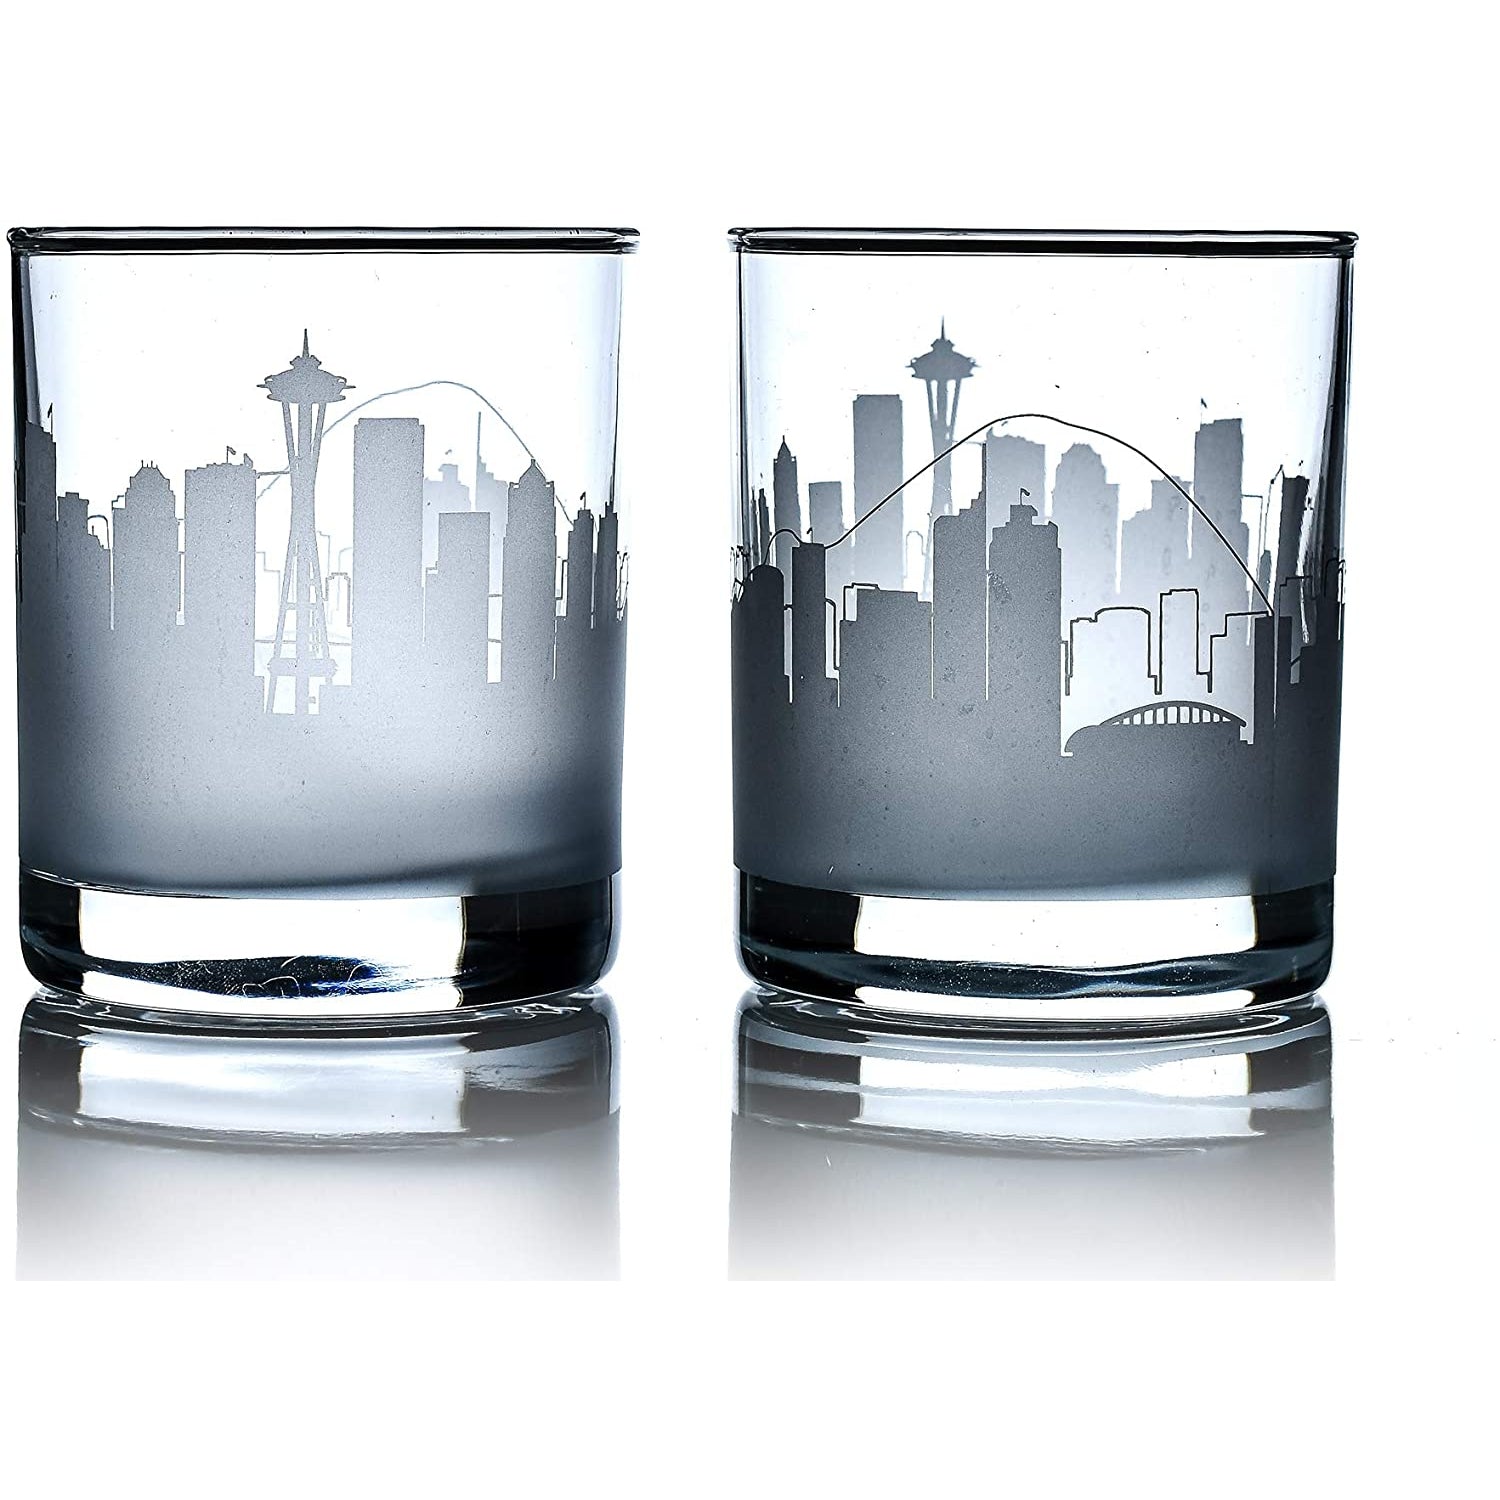 Greenline Goods Skyline Etched Seattle Whiskey Glasses Gift (Set of 2) | Old Fashioned Tumbler